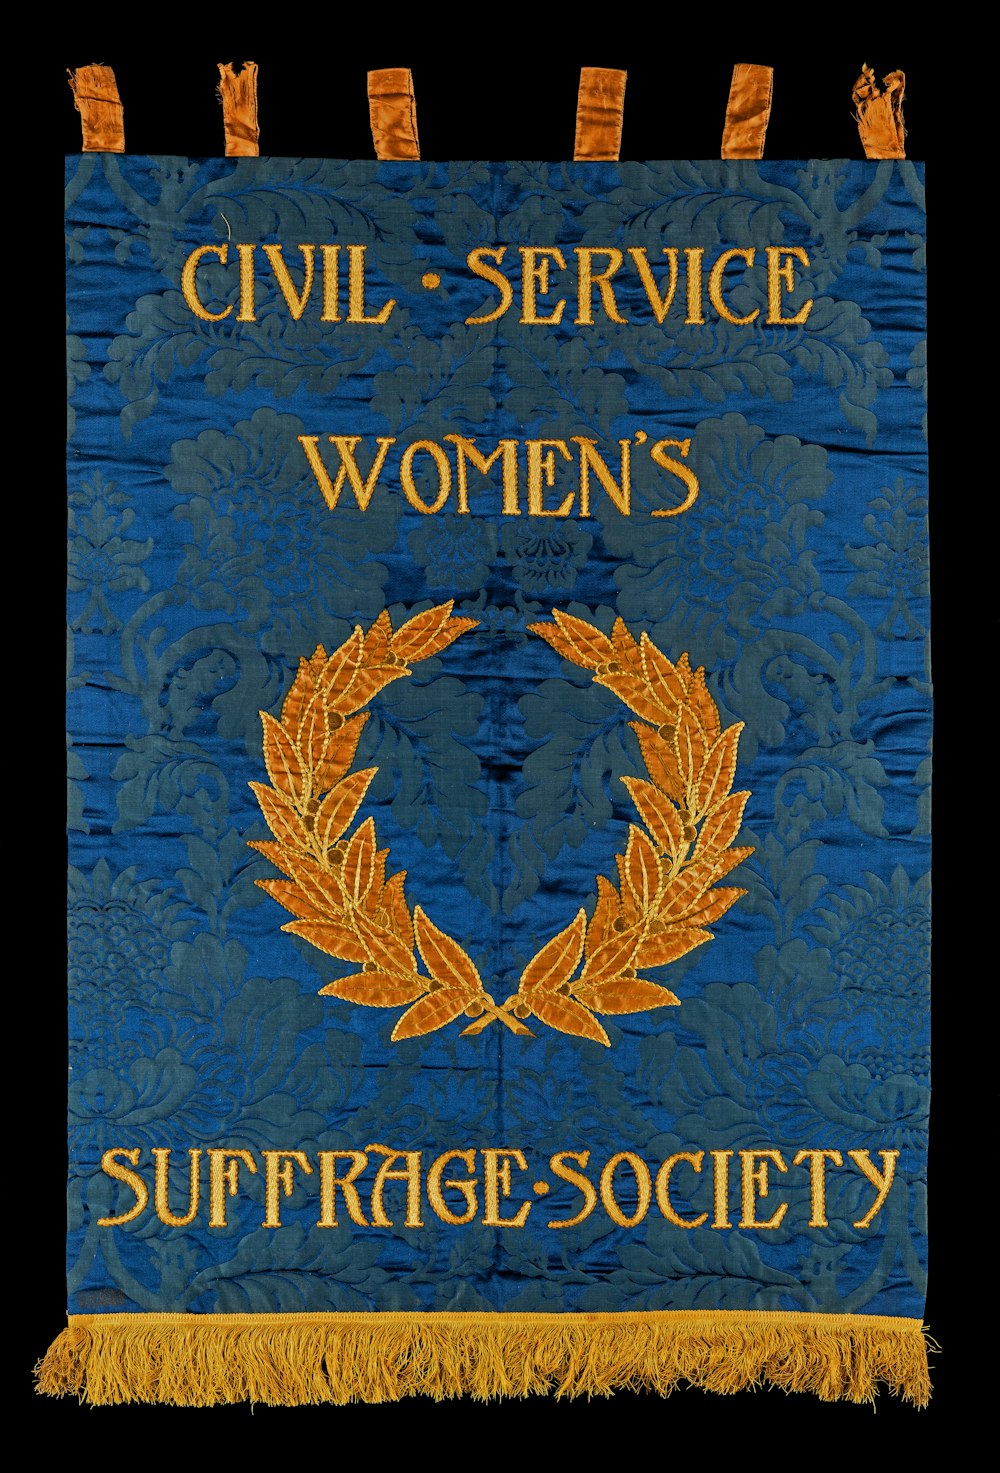 the civil service women's suffrage society banner